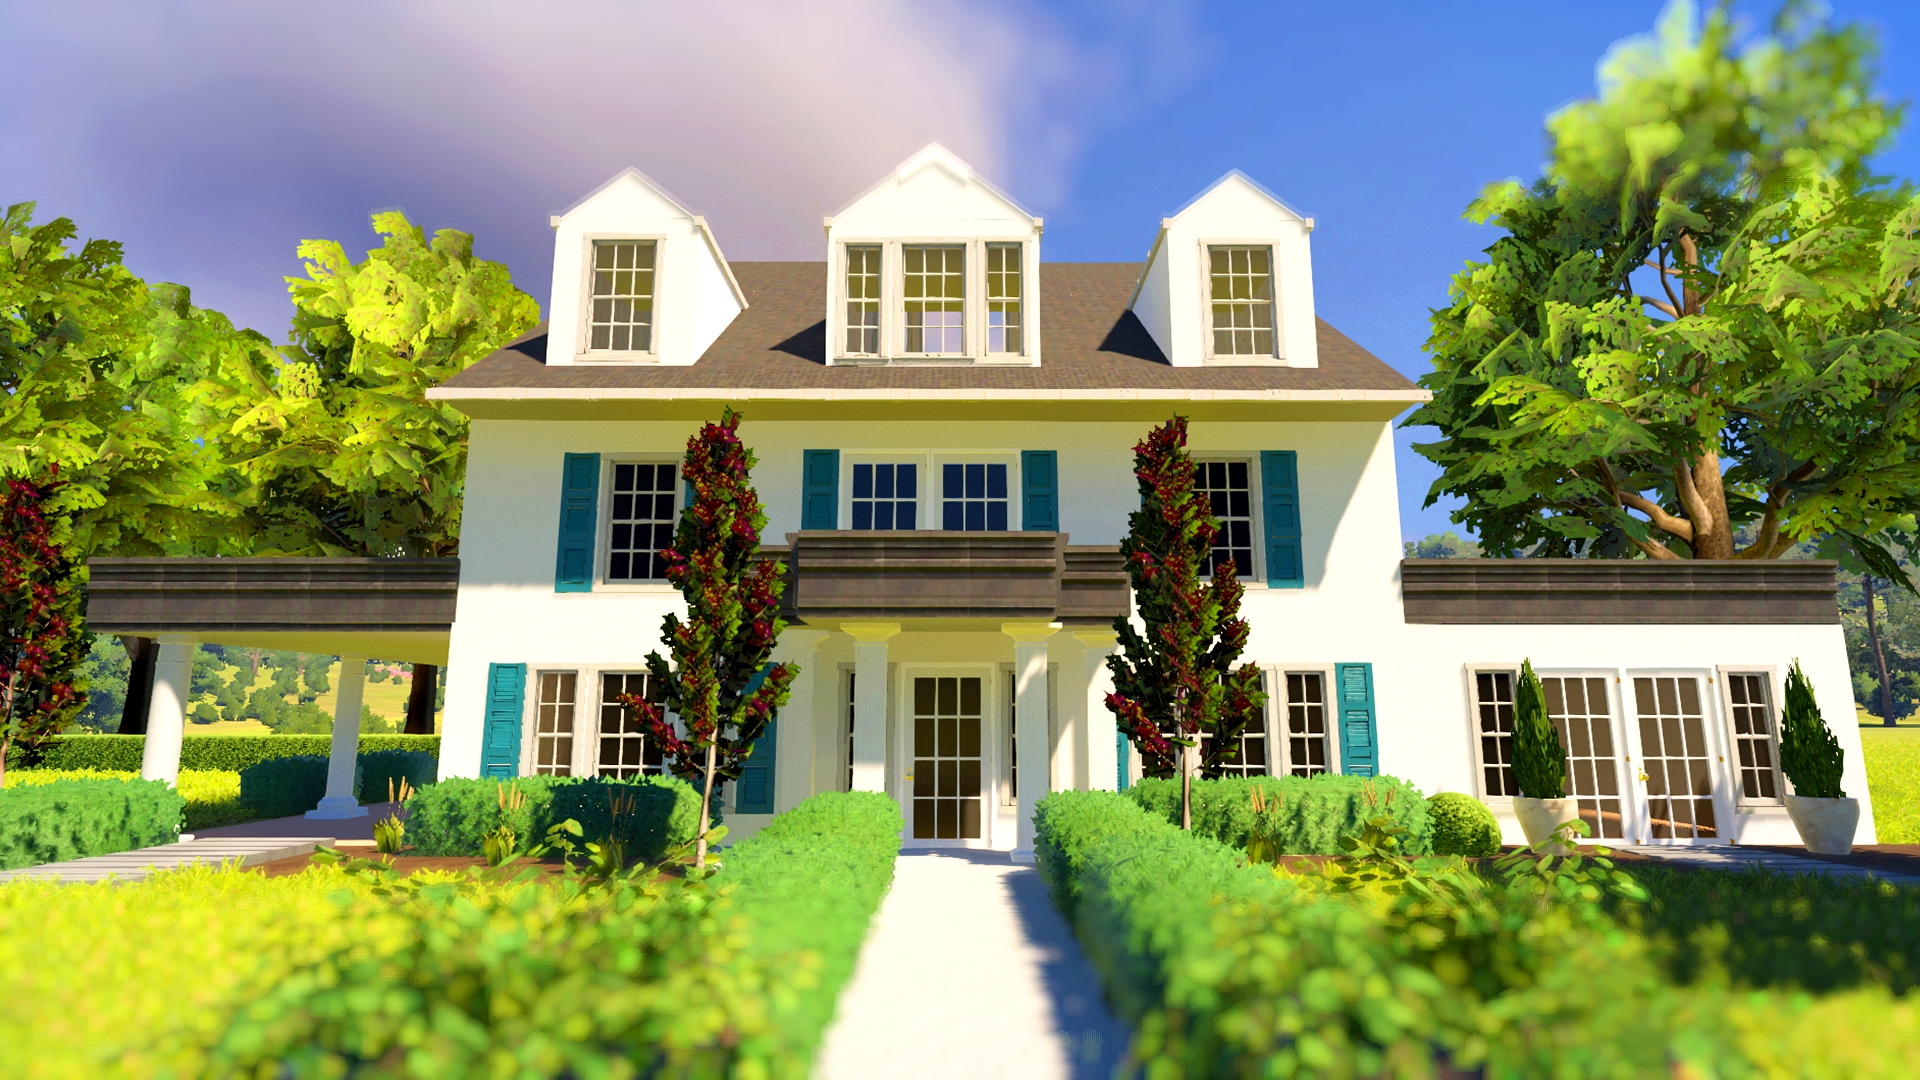 House Flipper meets The Sims 4 in this new co-op simulation game